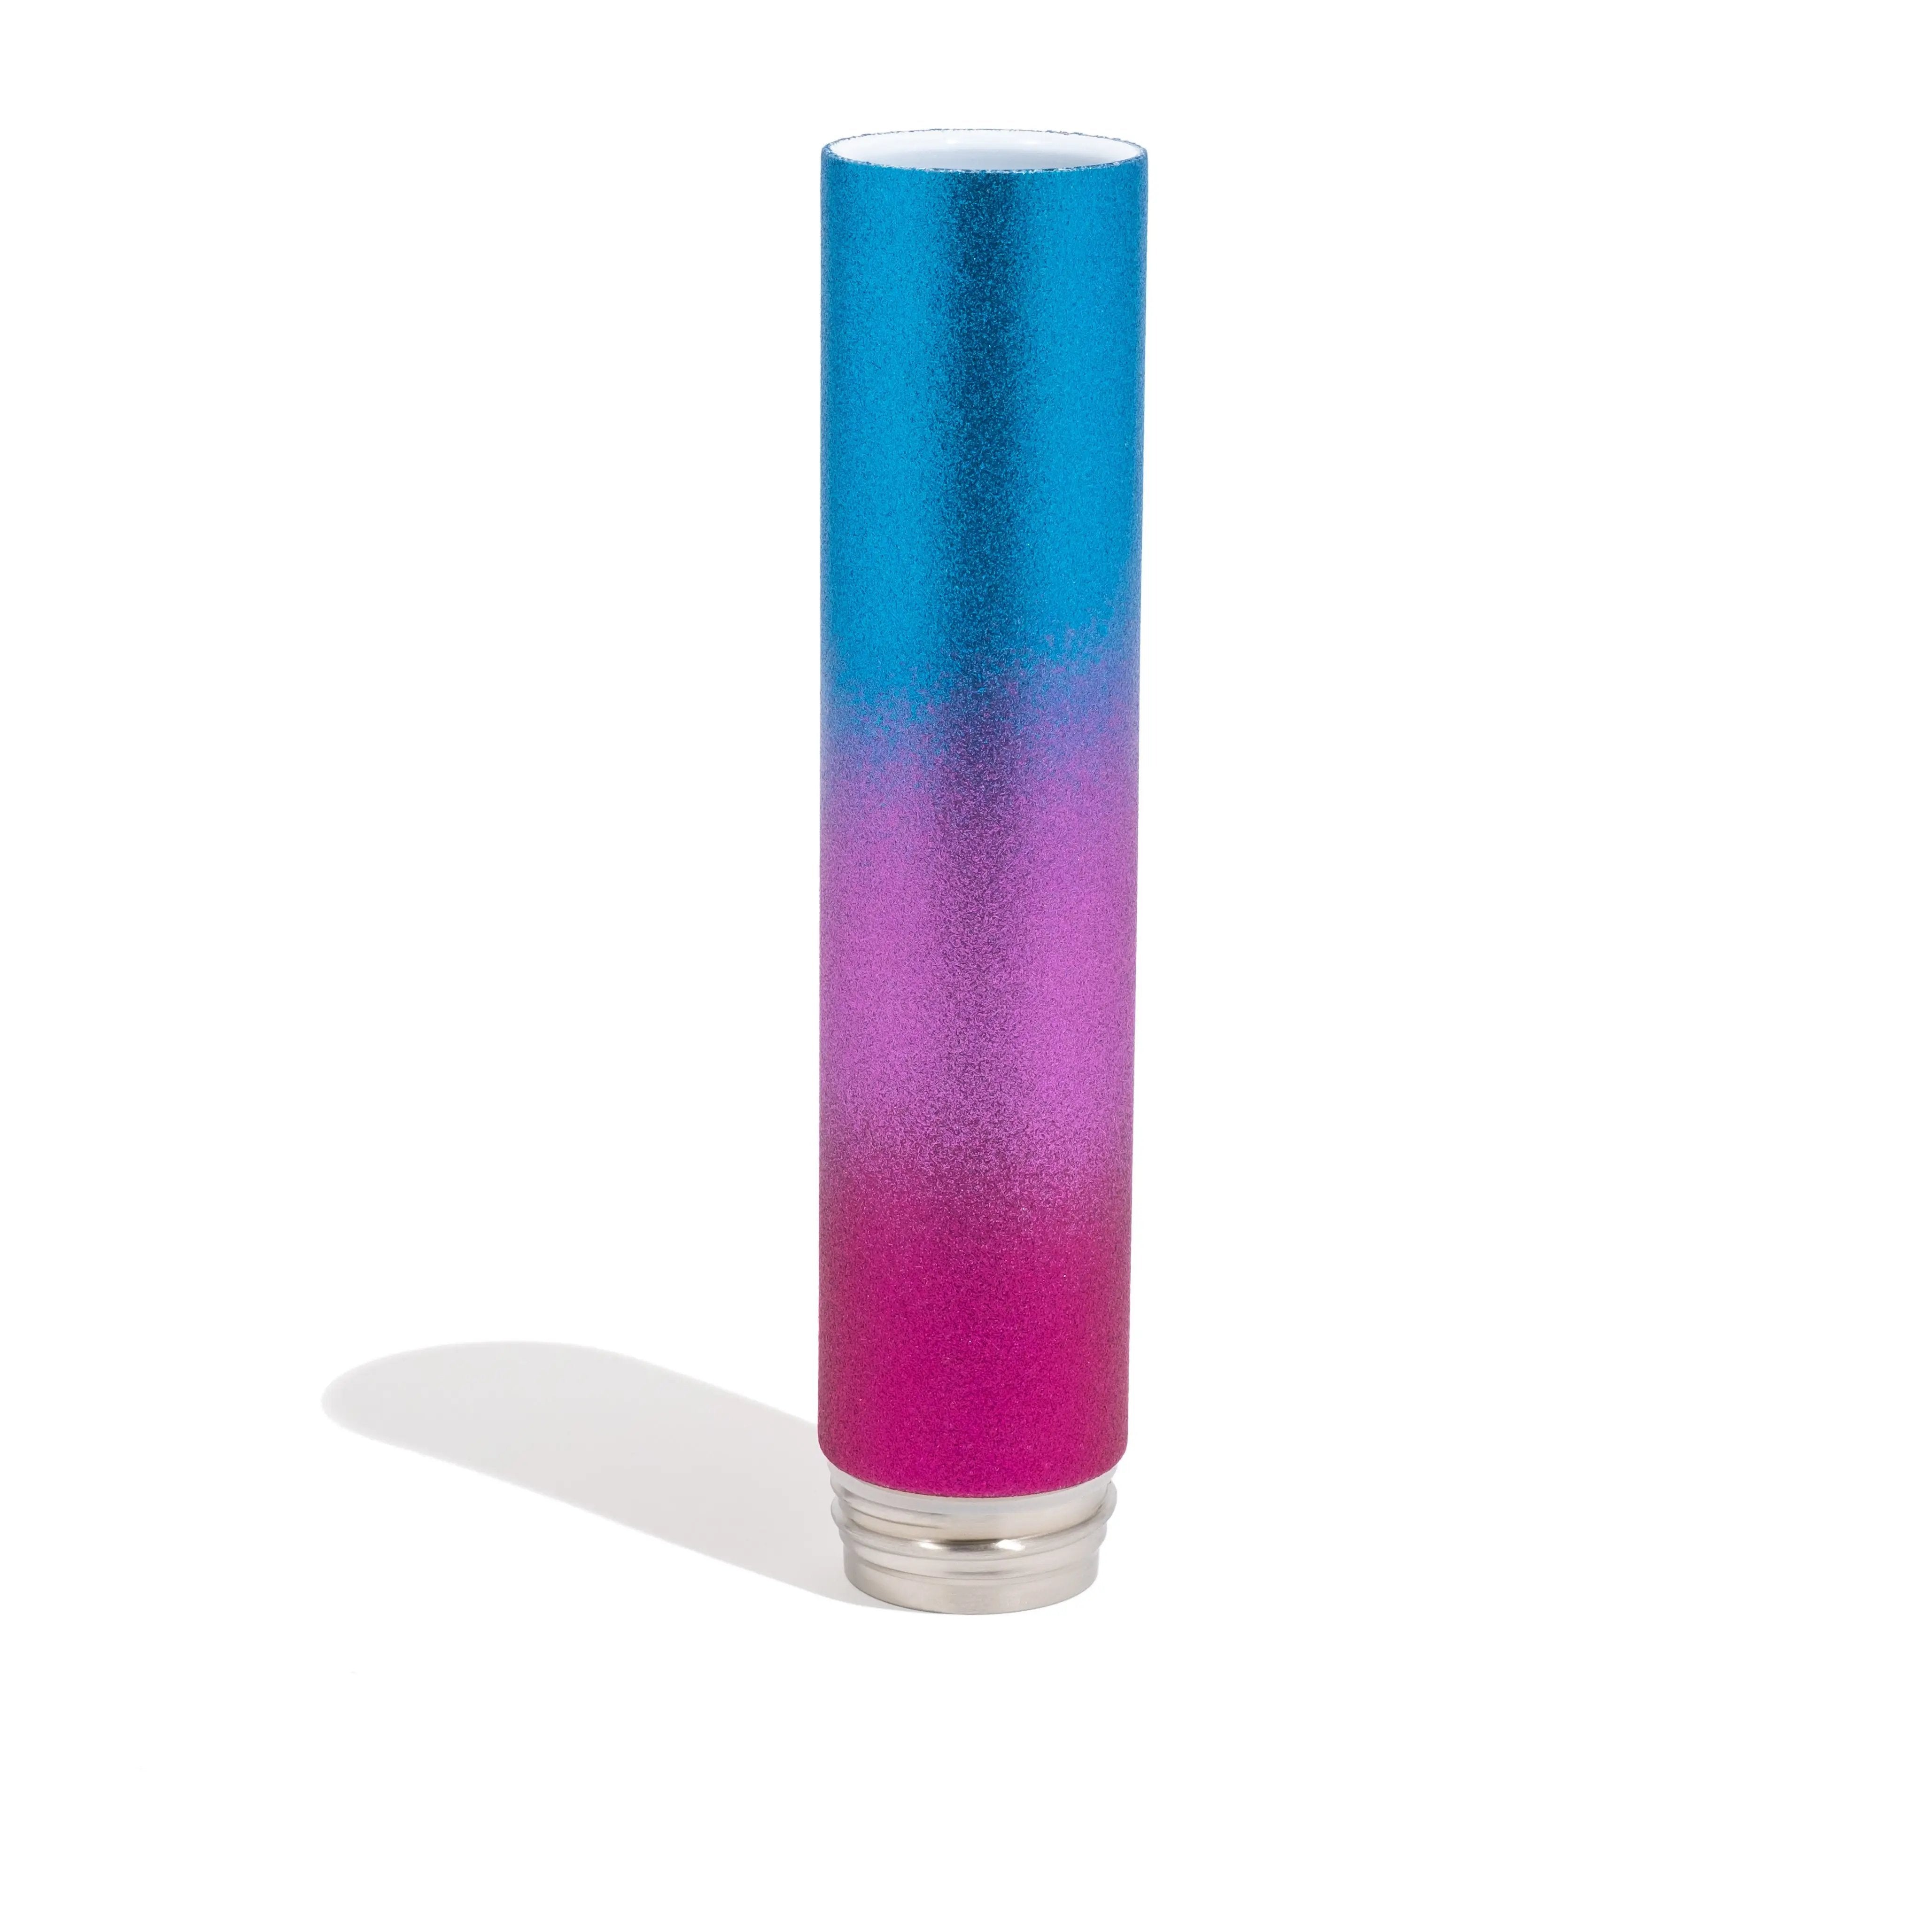 Chill - Limited Edition - Cotton Candy Glitterbomb by Chill Steel Pipes